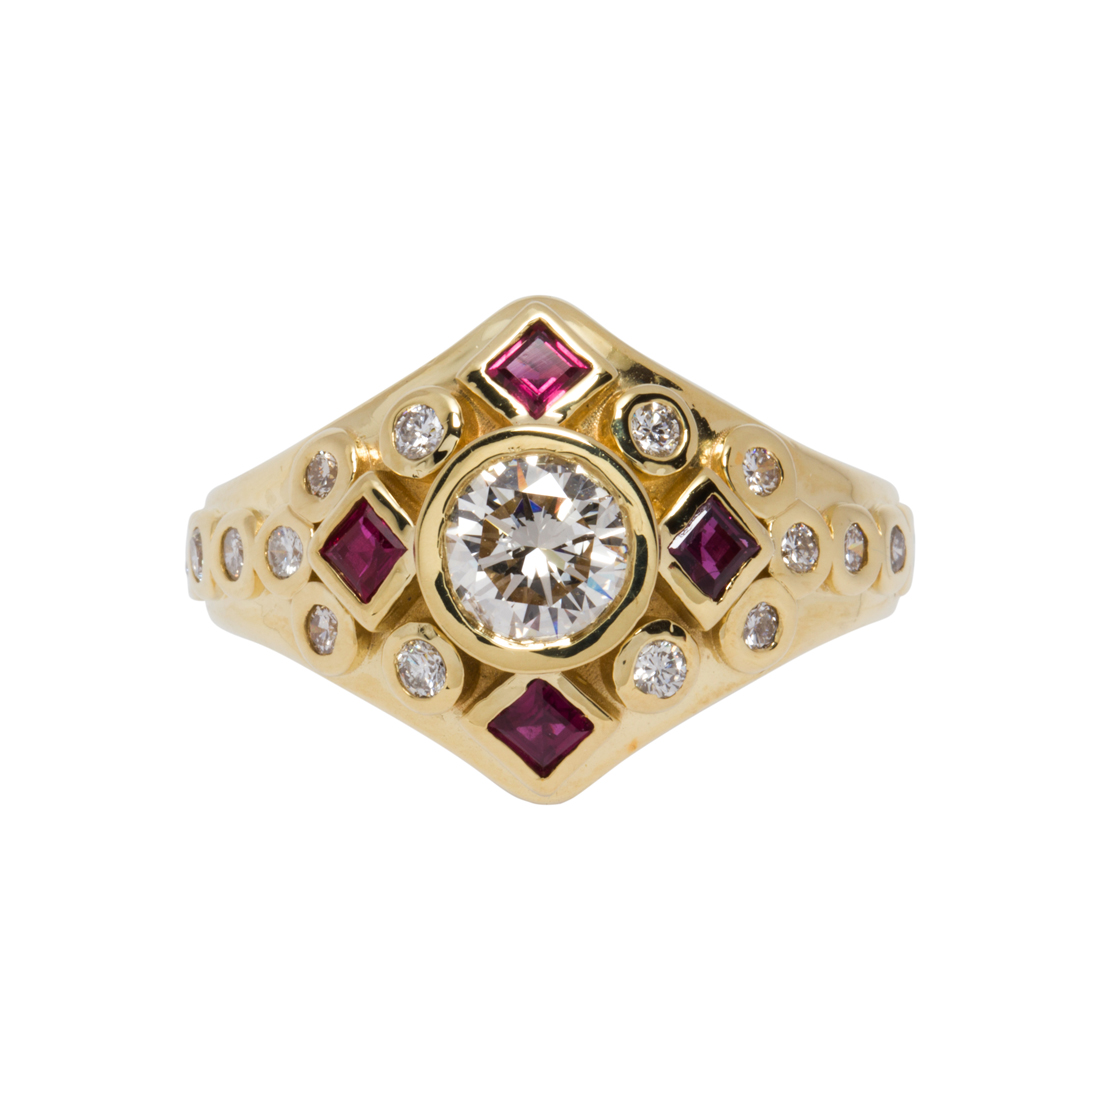 A DIAMOND RUBY AND 18K GOLD RING 3ce236